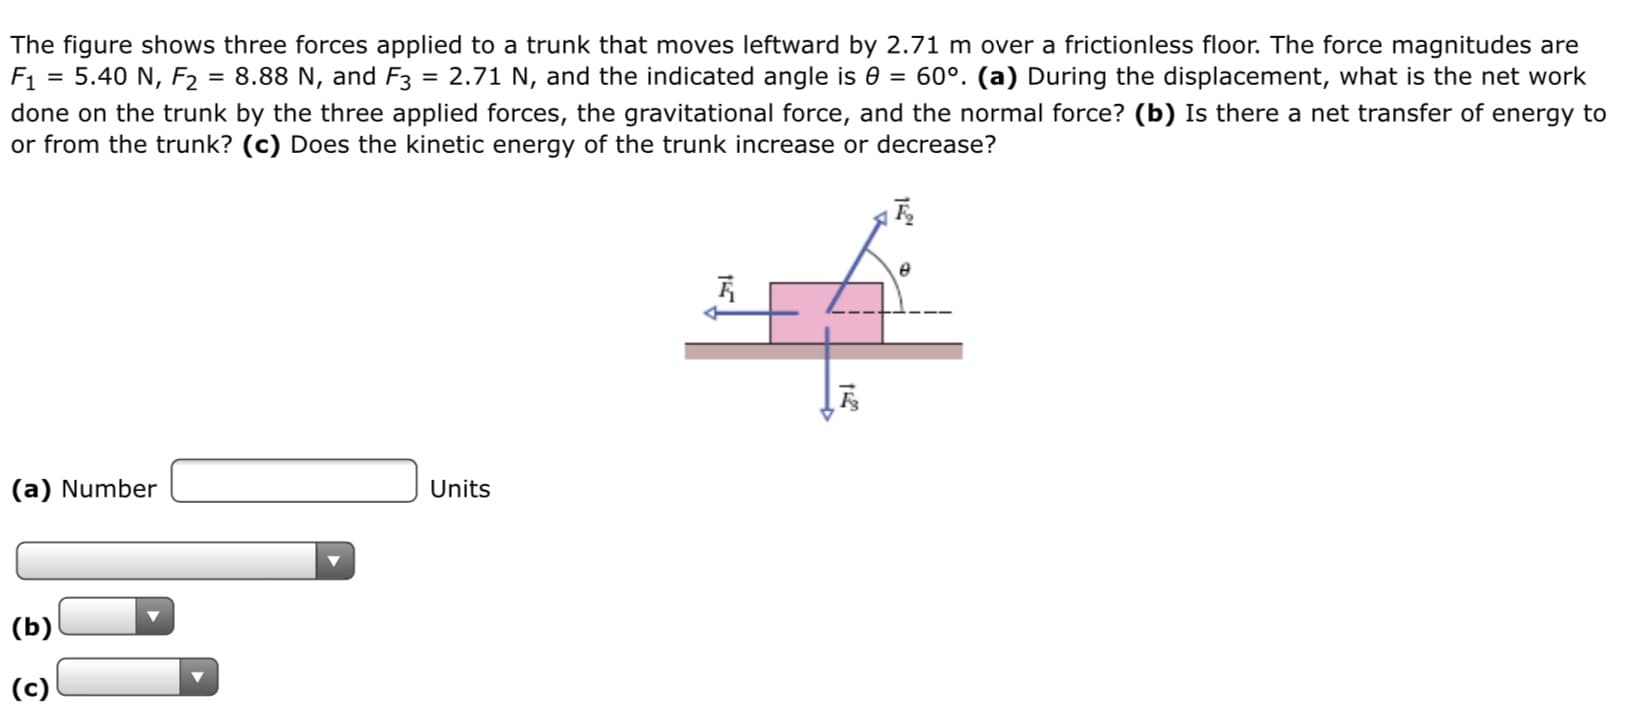 The figure shows three forces applied to a trunk that moves leftward by 2.71 m over a frictionless floor. The force magnitudes are
= 5.40 N, F2 = 8.88 N, and F3 = 2.71 N, and the indicated angle is 0 = 60°. (a) During the displacement, what is the net work
F1
done on the trunk by the three applied forces, the gravitational force, and the normal force? (b) Is there a net transfer of energy to
or from the trunk? (c) Does the kinetic energy of the trunk increase or decrease?
(a) Number
Units
(b)
(c)
